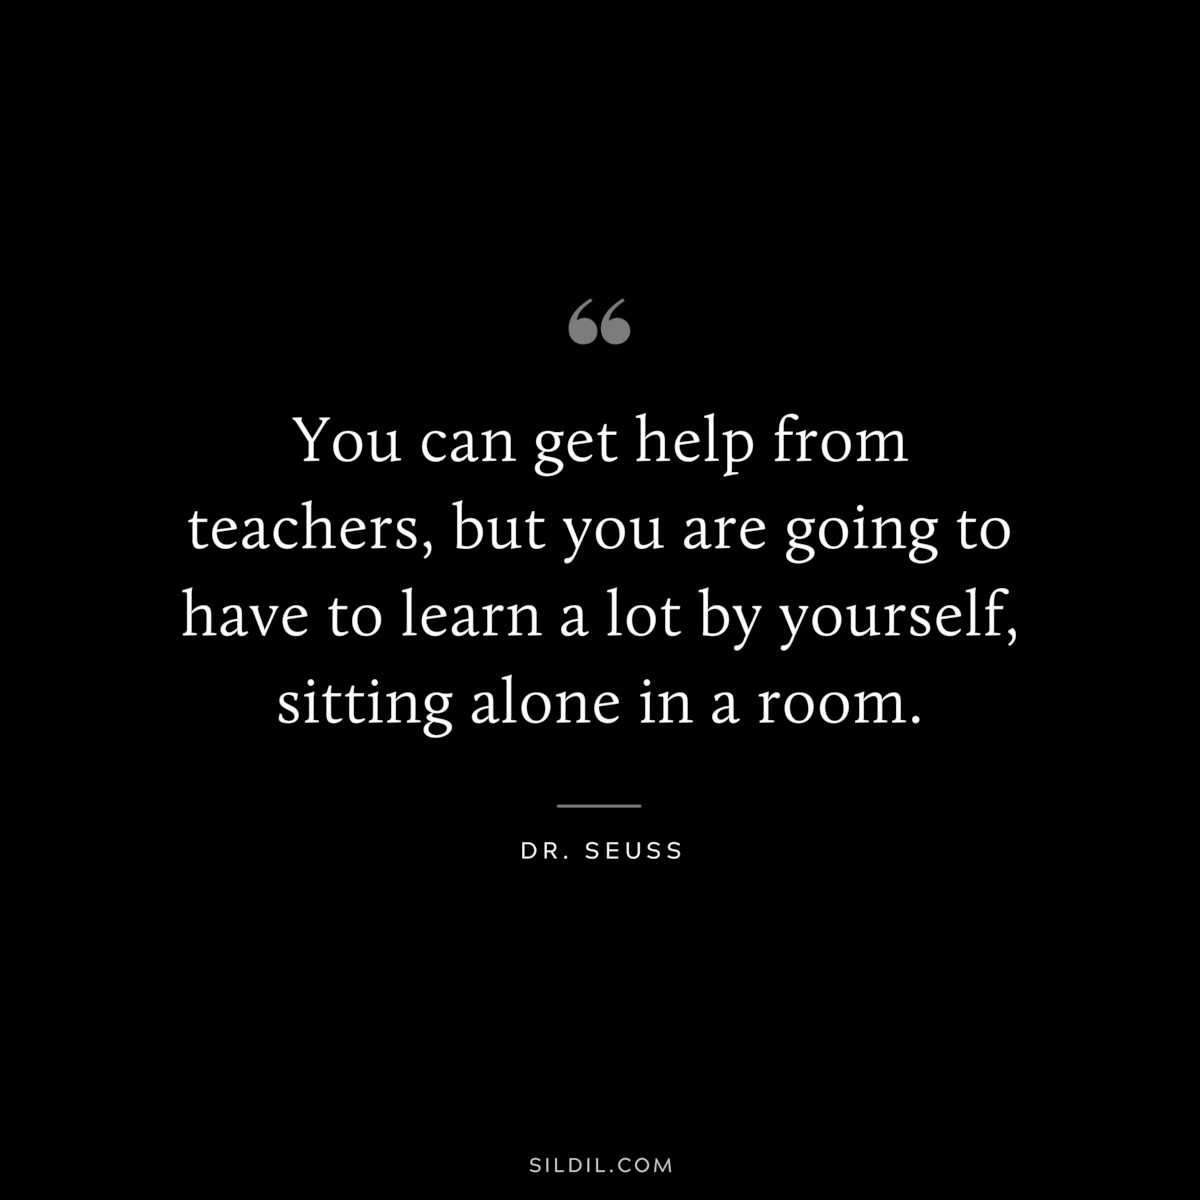 You can get help from teachers, but you are going to have to learn a lot by yourself, sitting alone in a room. ― Dr. Seuss